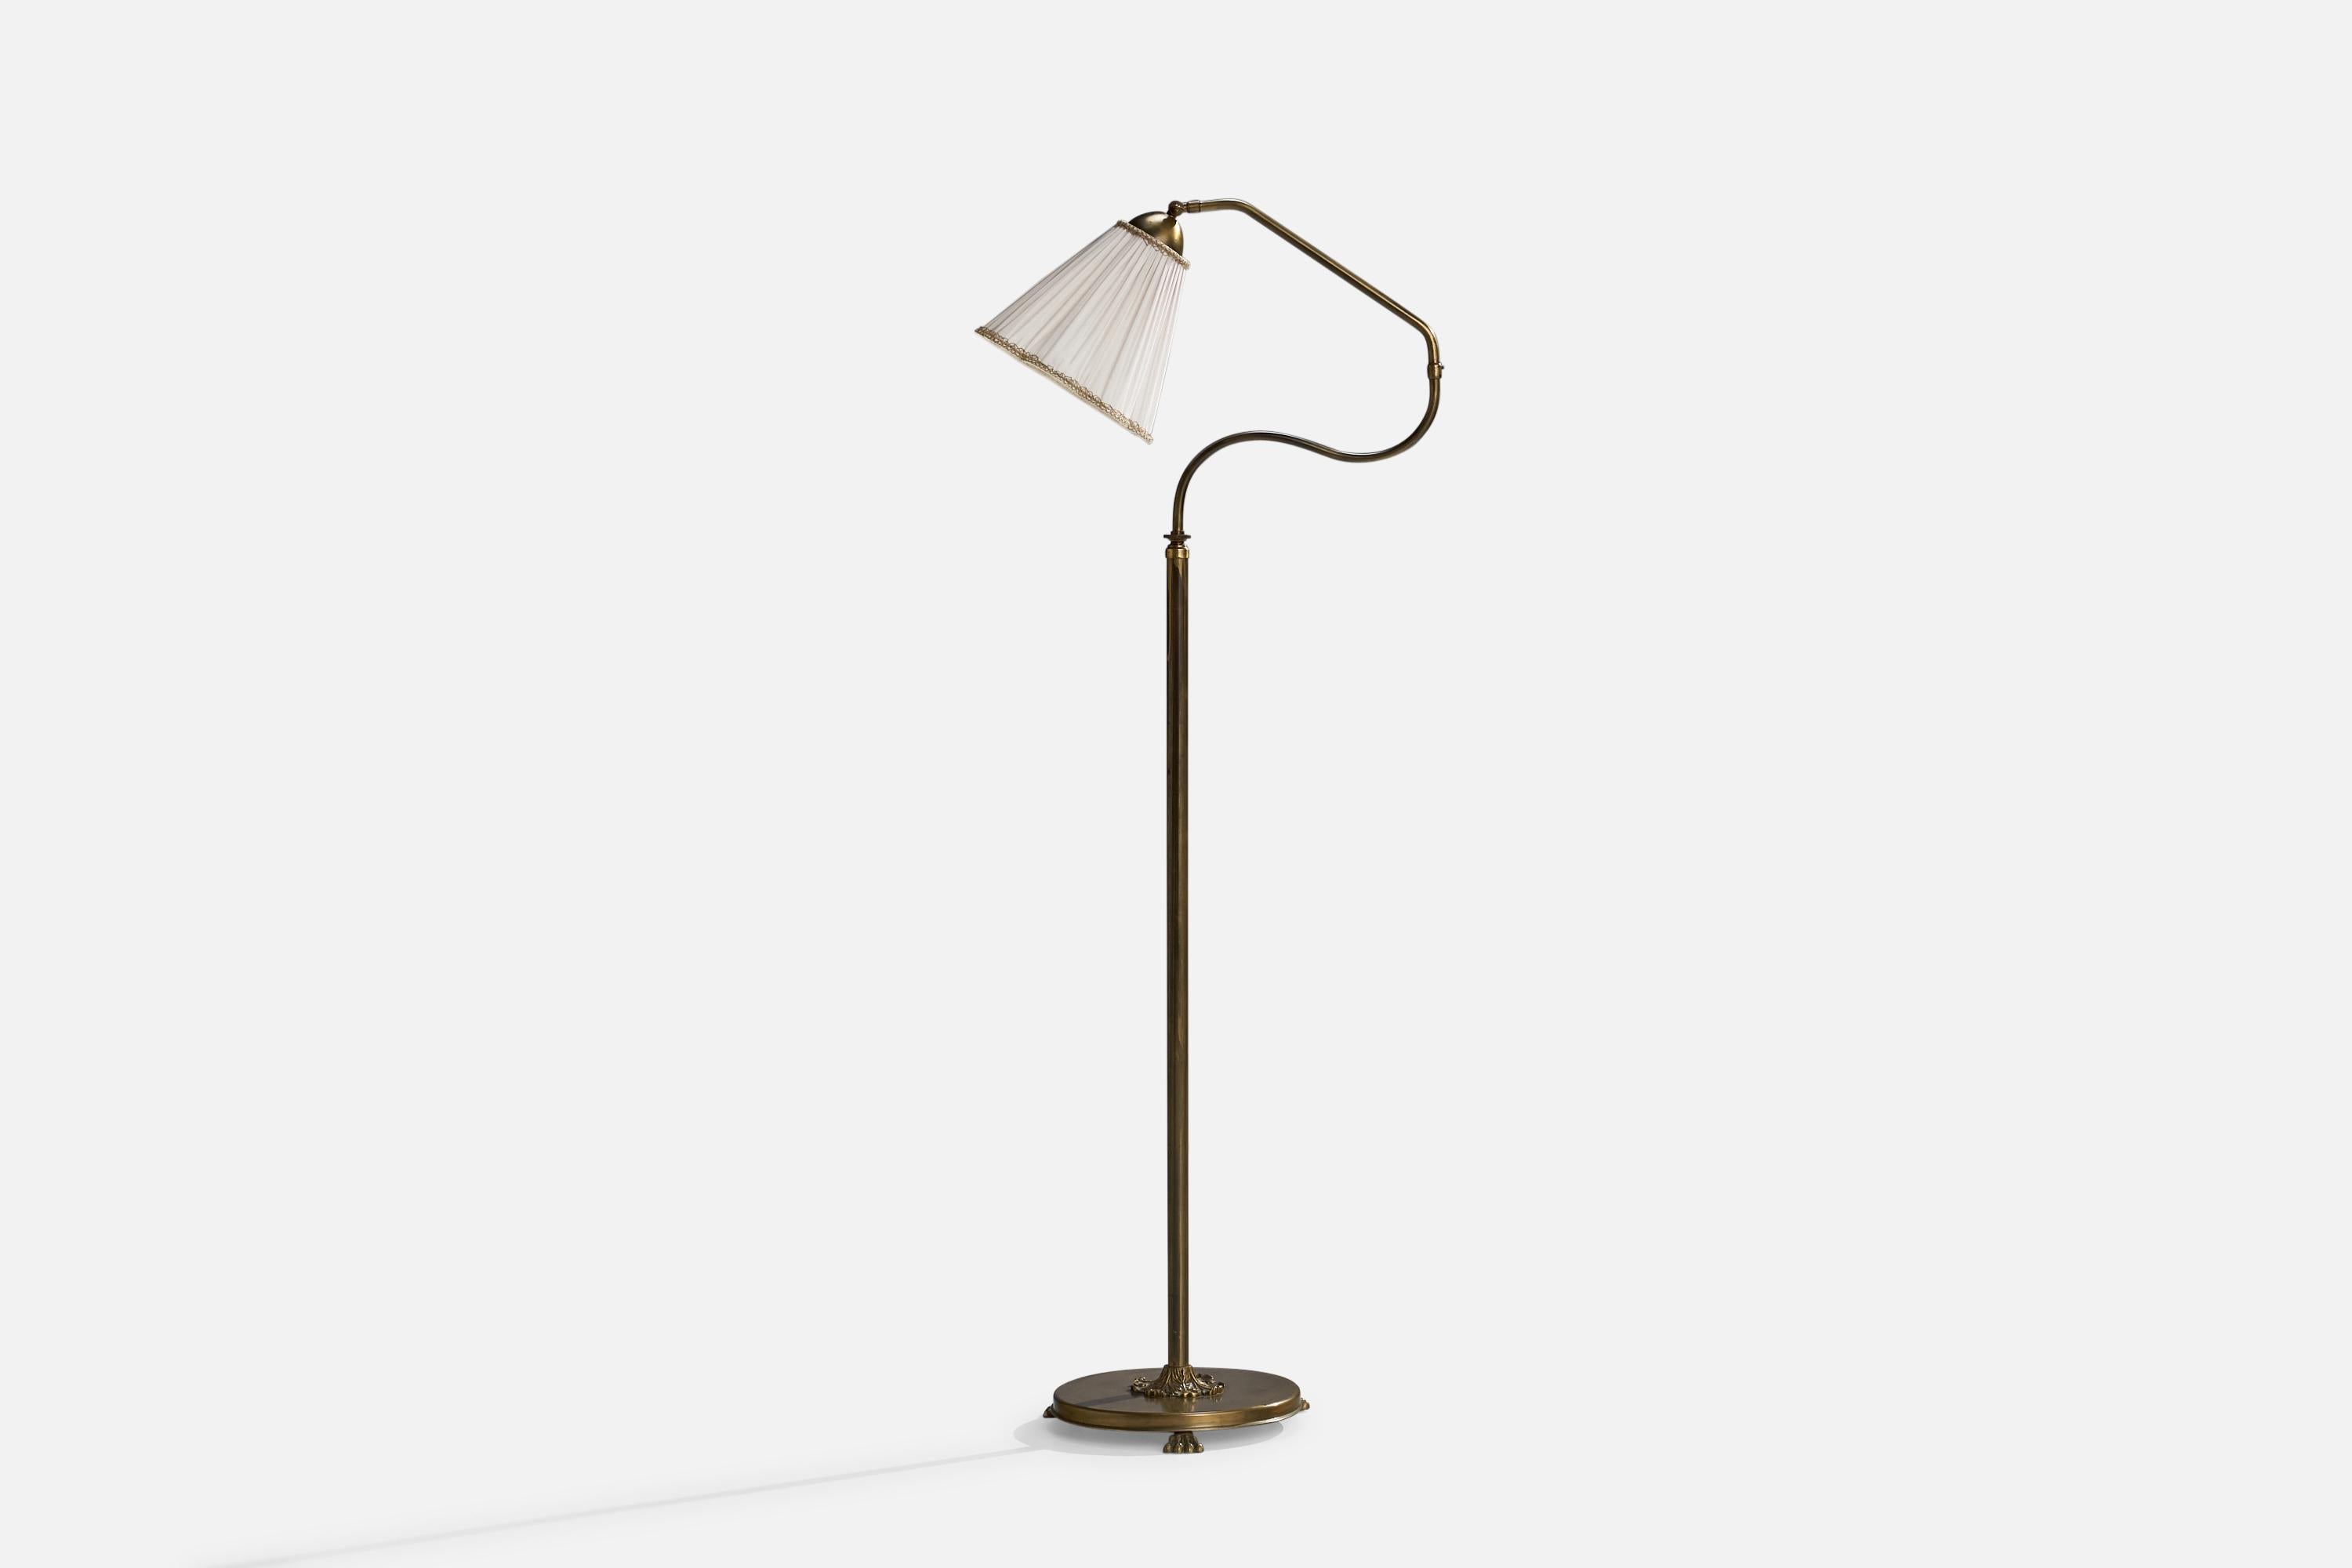 An adjustable brass and white fabric floor lamp designed and produced in Sweden, 1940s.

Overall Dimensions (inches): 57”  H x 21.5” W x 13” D
Stated dimensions include shade.
Bulb Specifications: E-26 Bulb
Number of Sockets: 1
All lighting will be